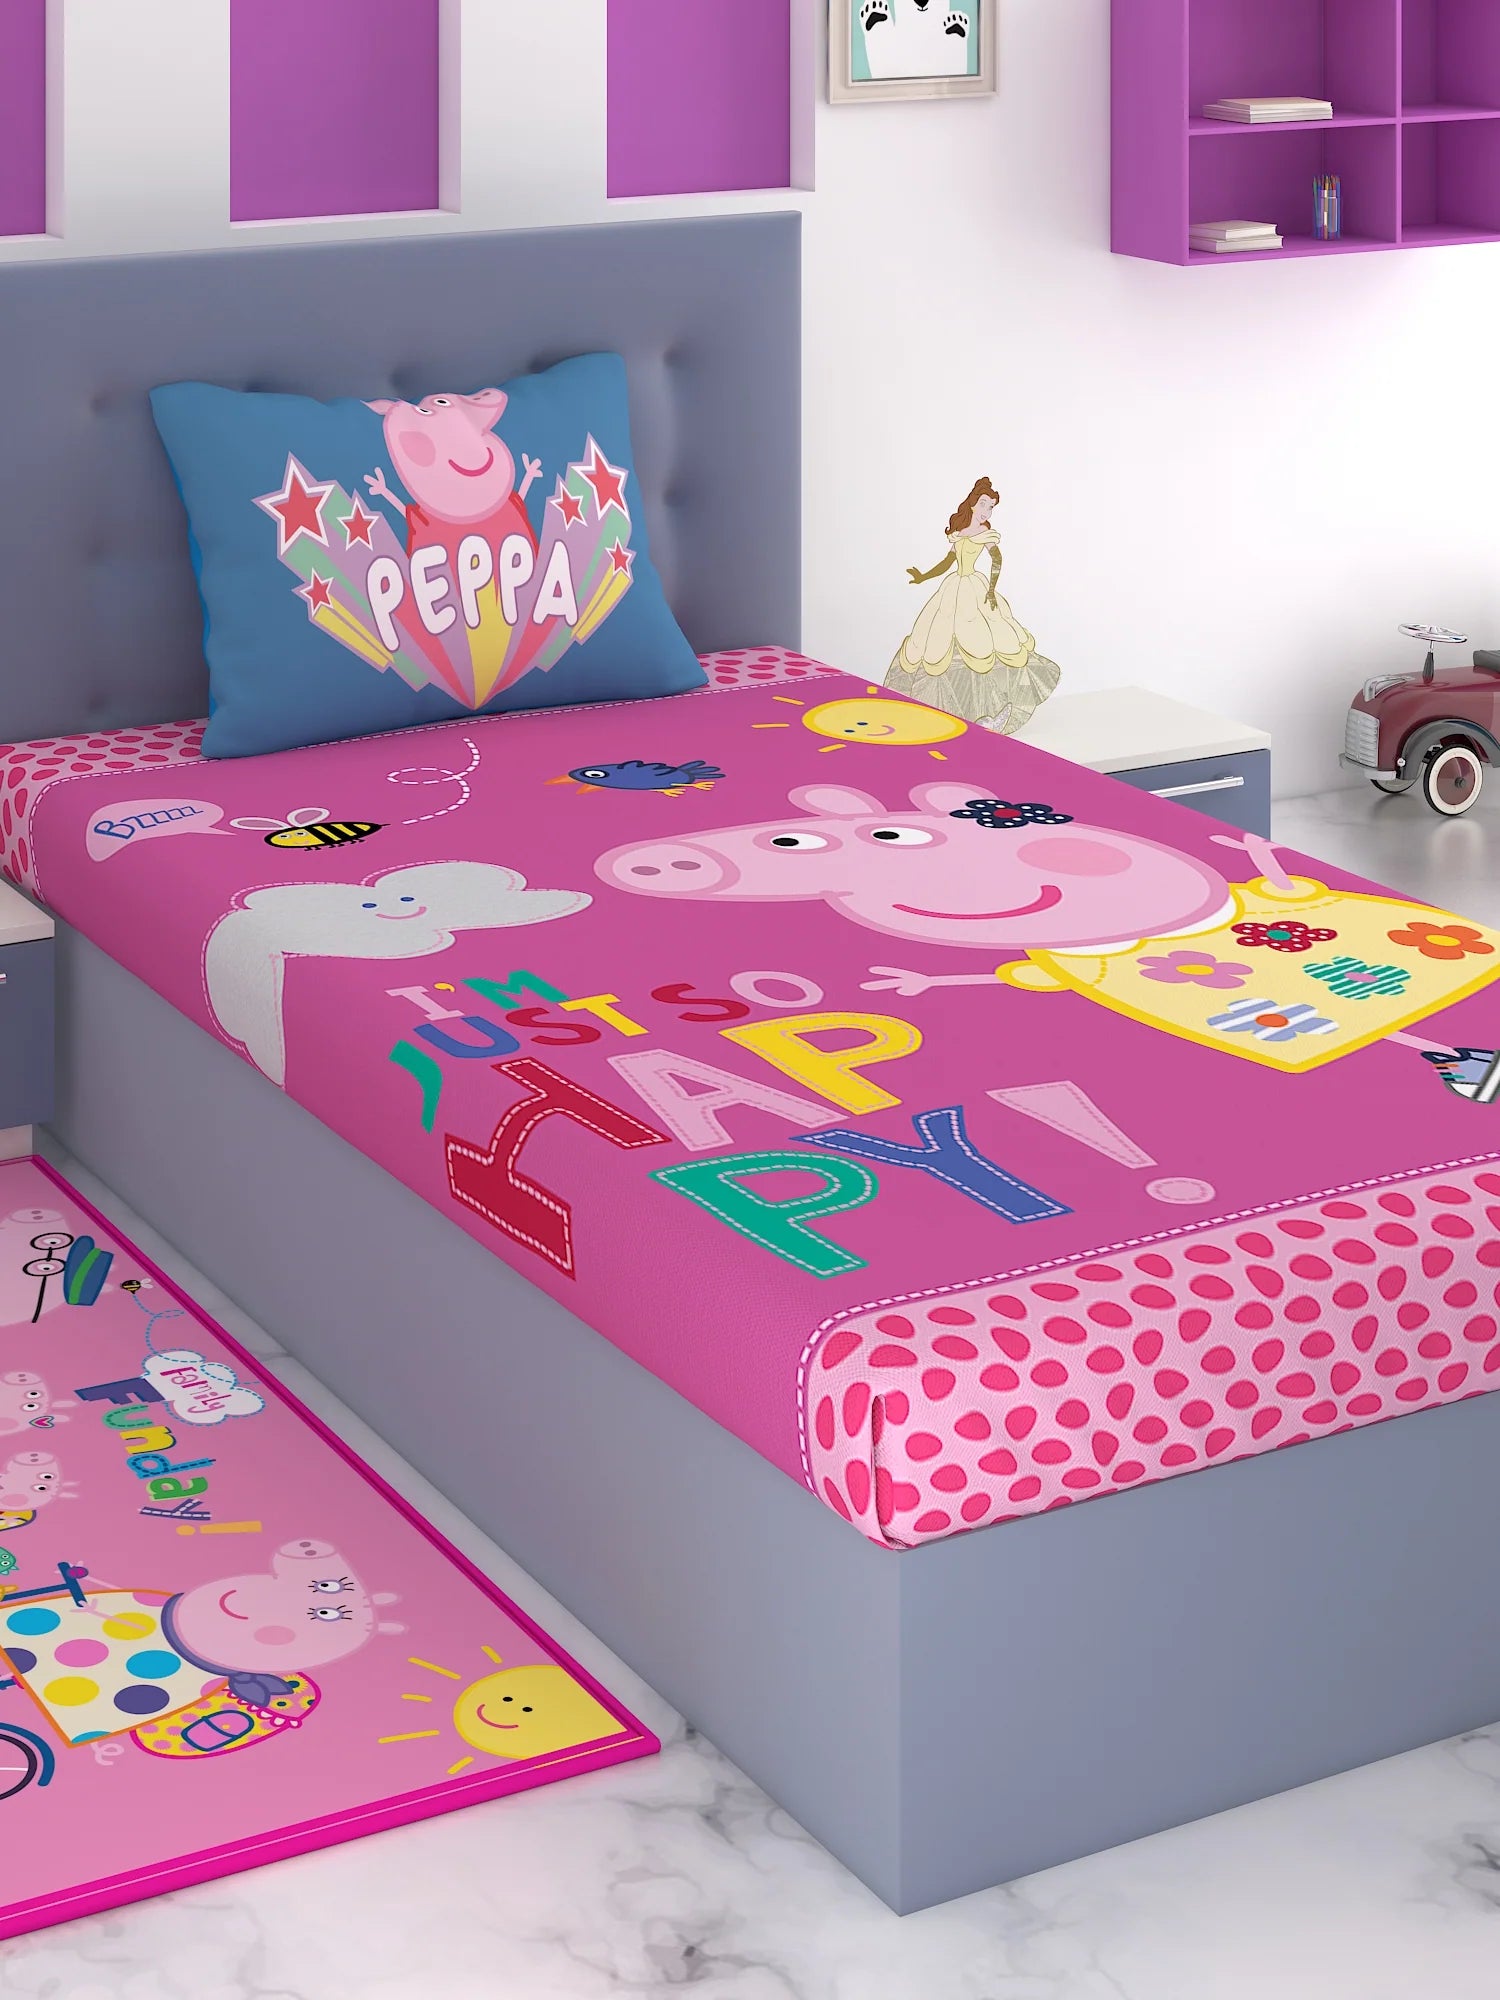 Vendor: Peppa Pig SKU: AL-PPP-03-229-S Availability: Out Of Stock Product Type: Peppa Pig Product Details  Type: Kids Bedsheet  Bed Sheet Size: Single, 147x223 cm  Pillow Cover: 43cm x 68cm  Net Content: Pack of 1xBed Sheet, 1xPillow Cover Material & Care